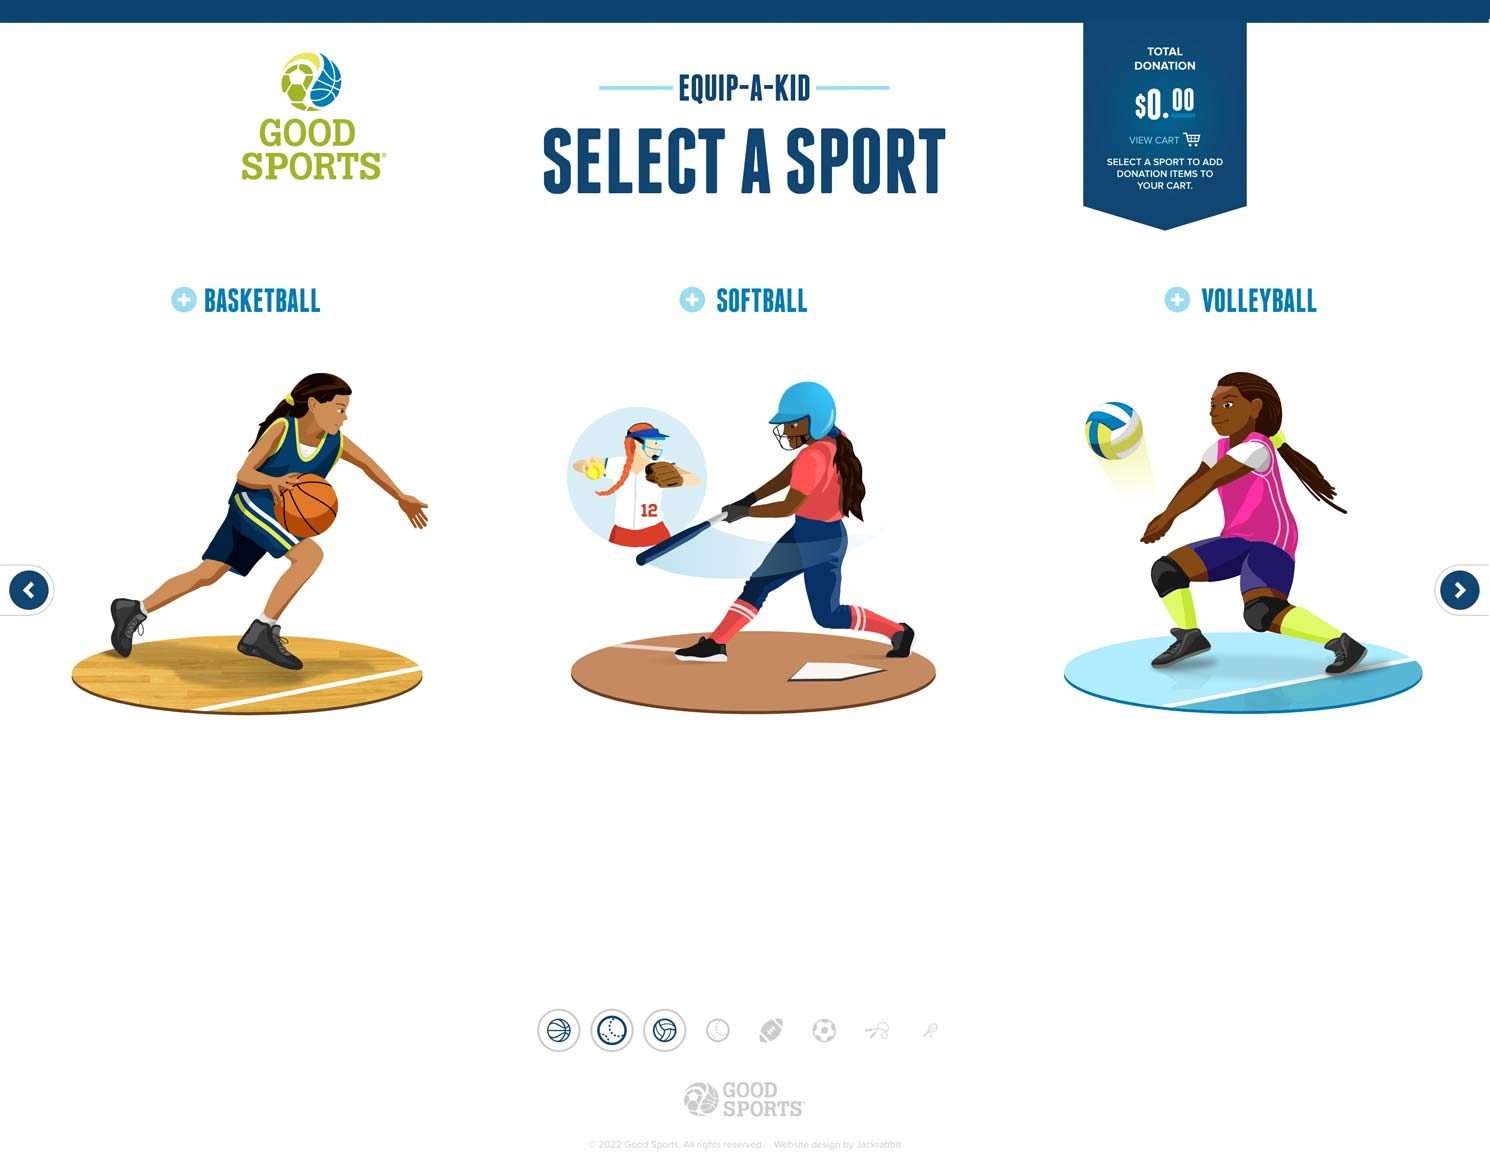 Good Sports Equip-A-Kid select a sport page